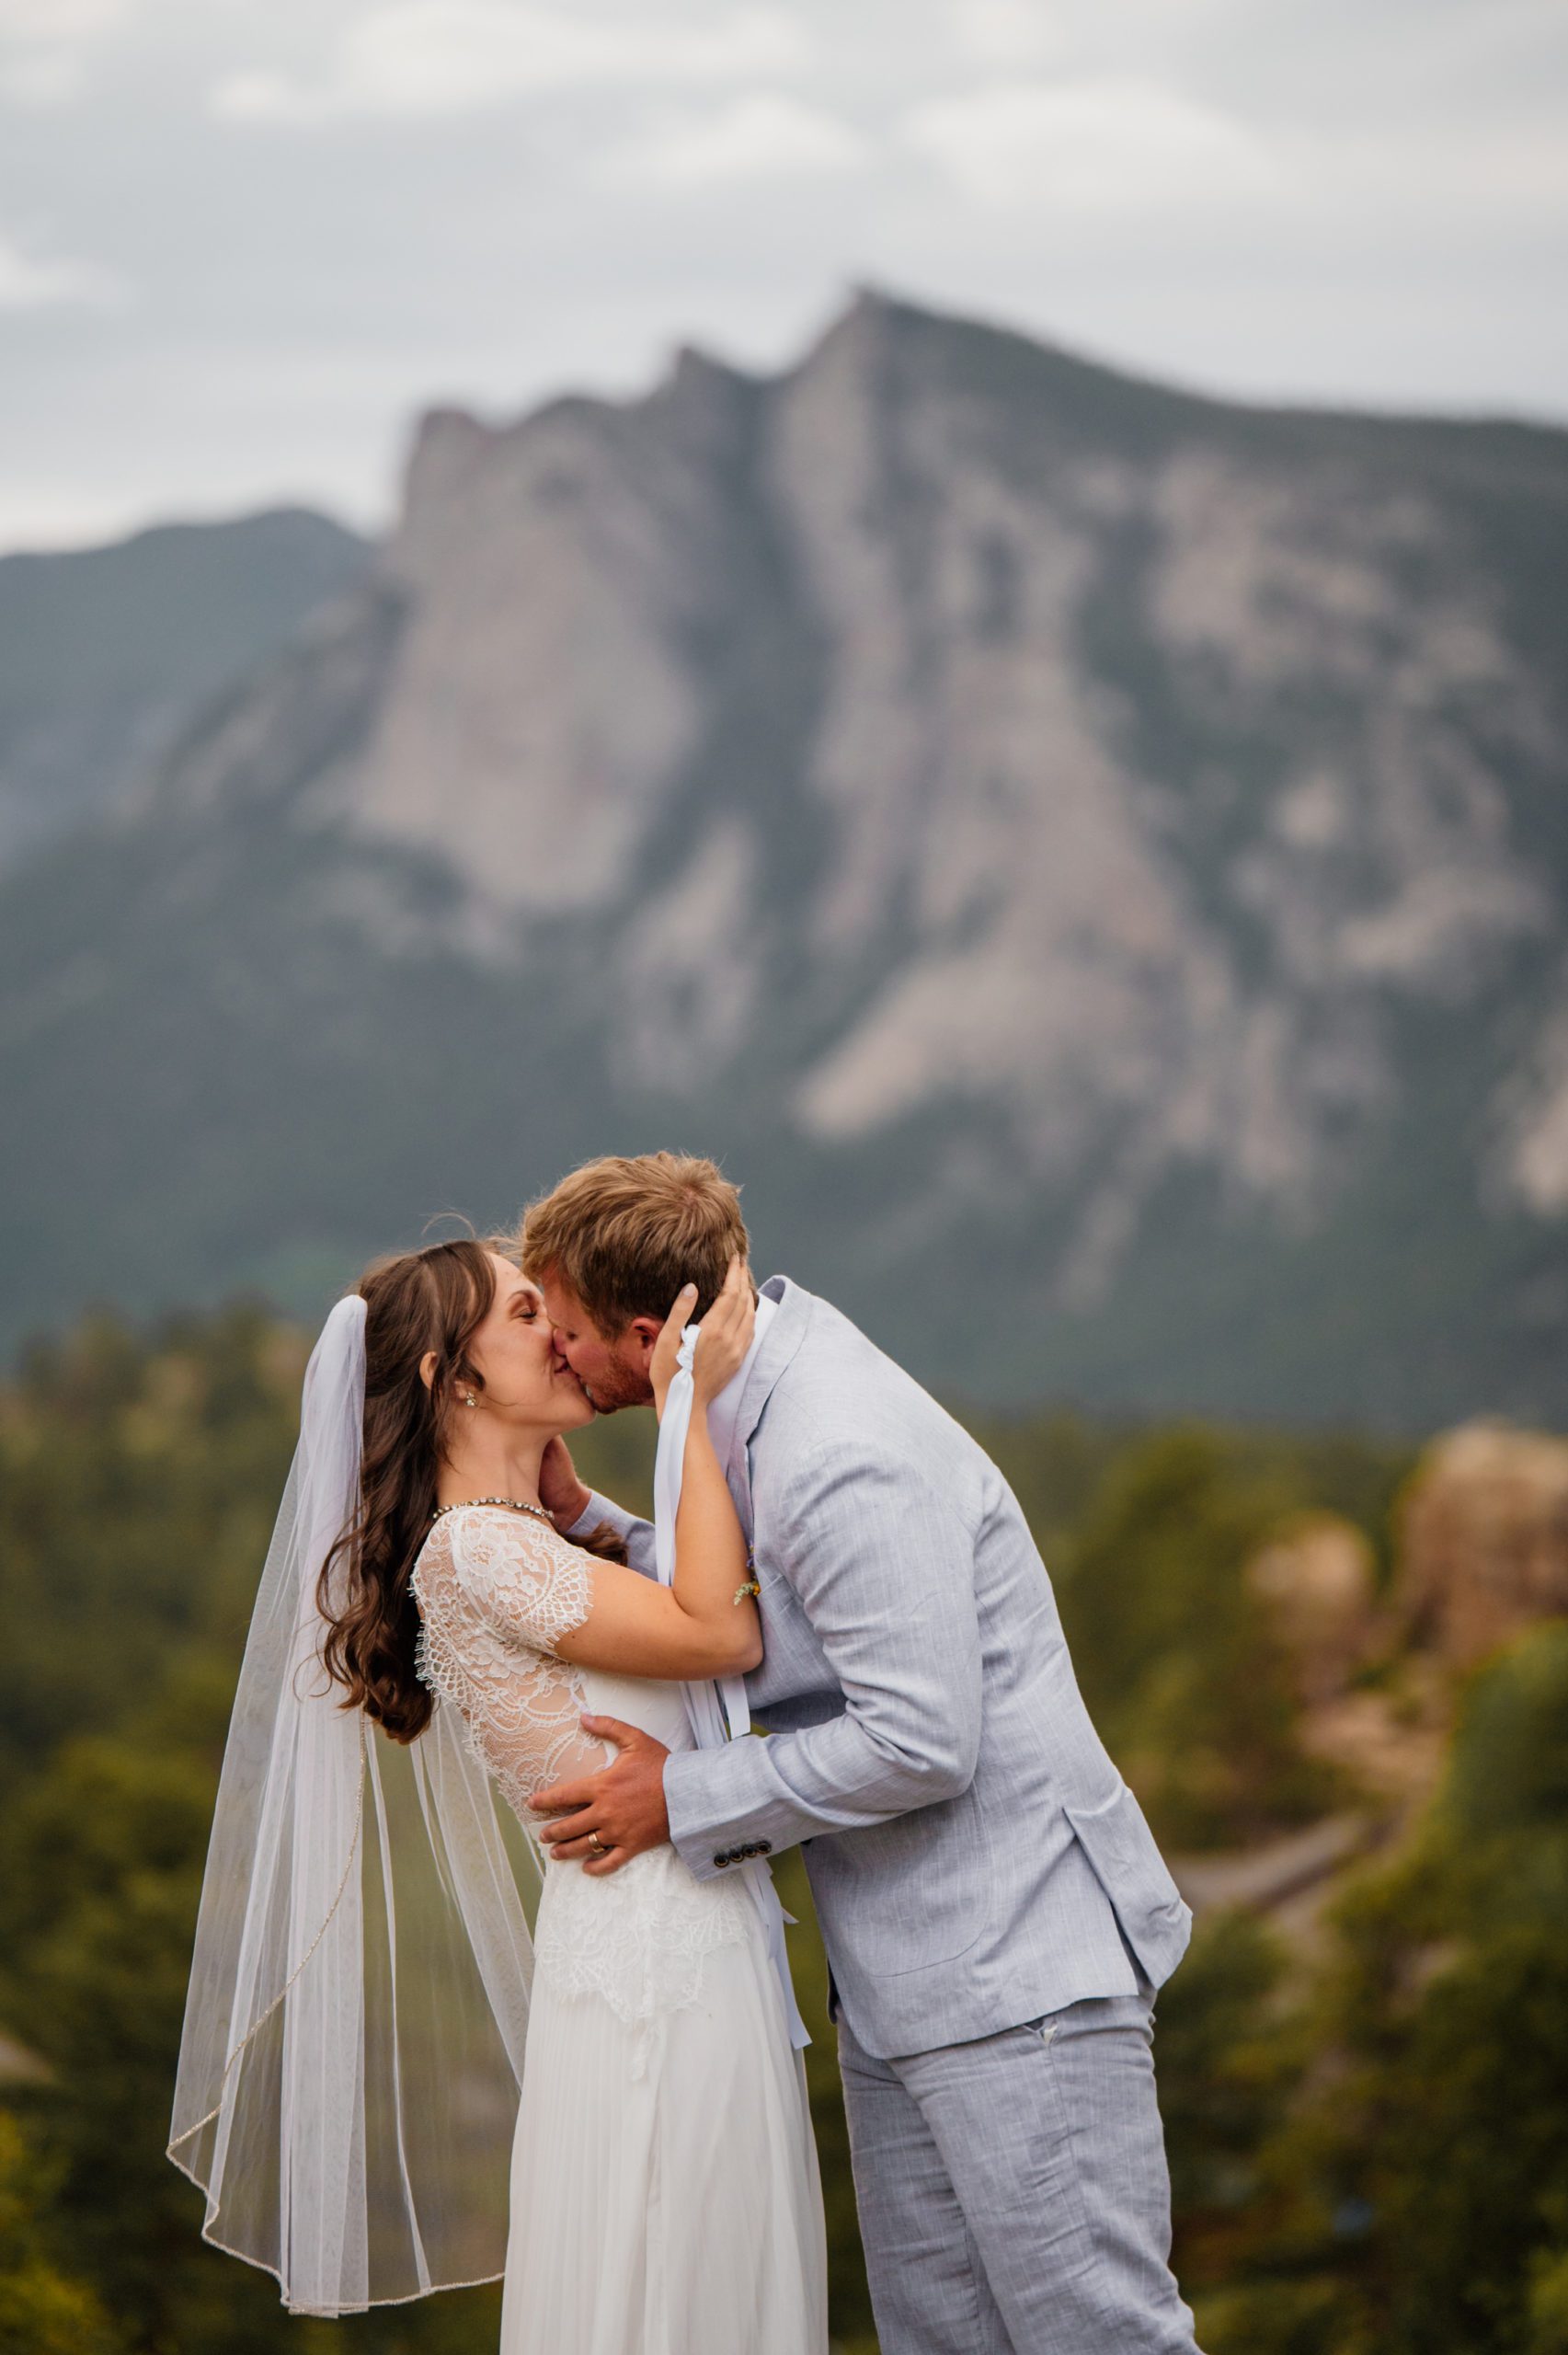 The bride and groom kiss for the first time as husband and wife after their elopement ceremony at Knoll Willows in Estes Park.